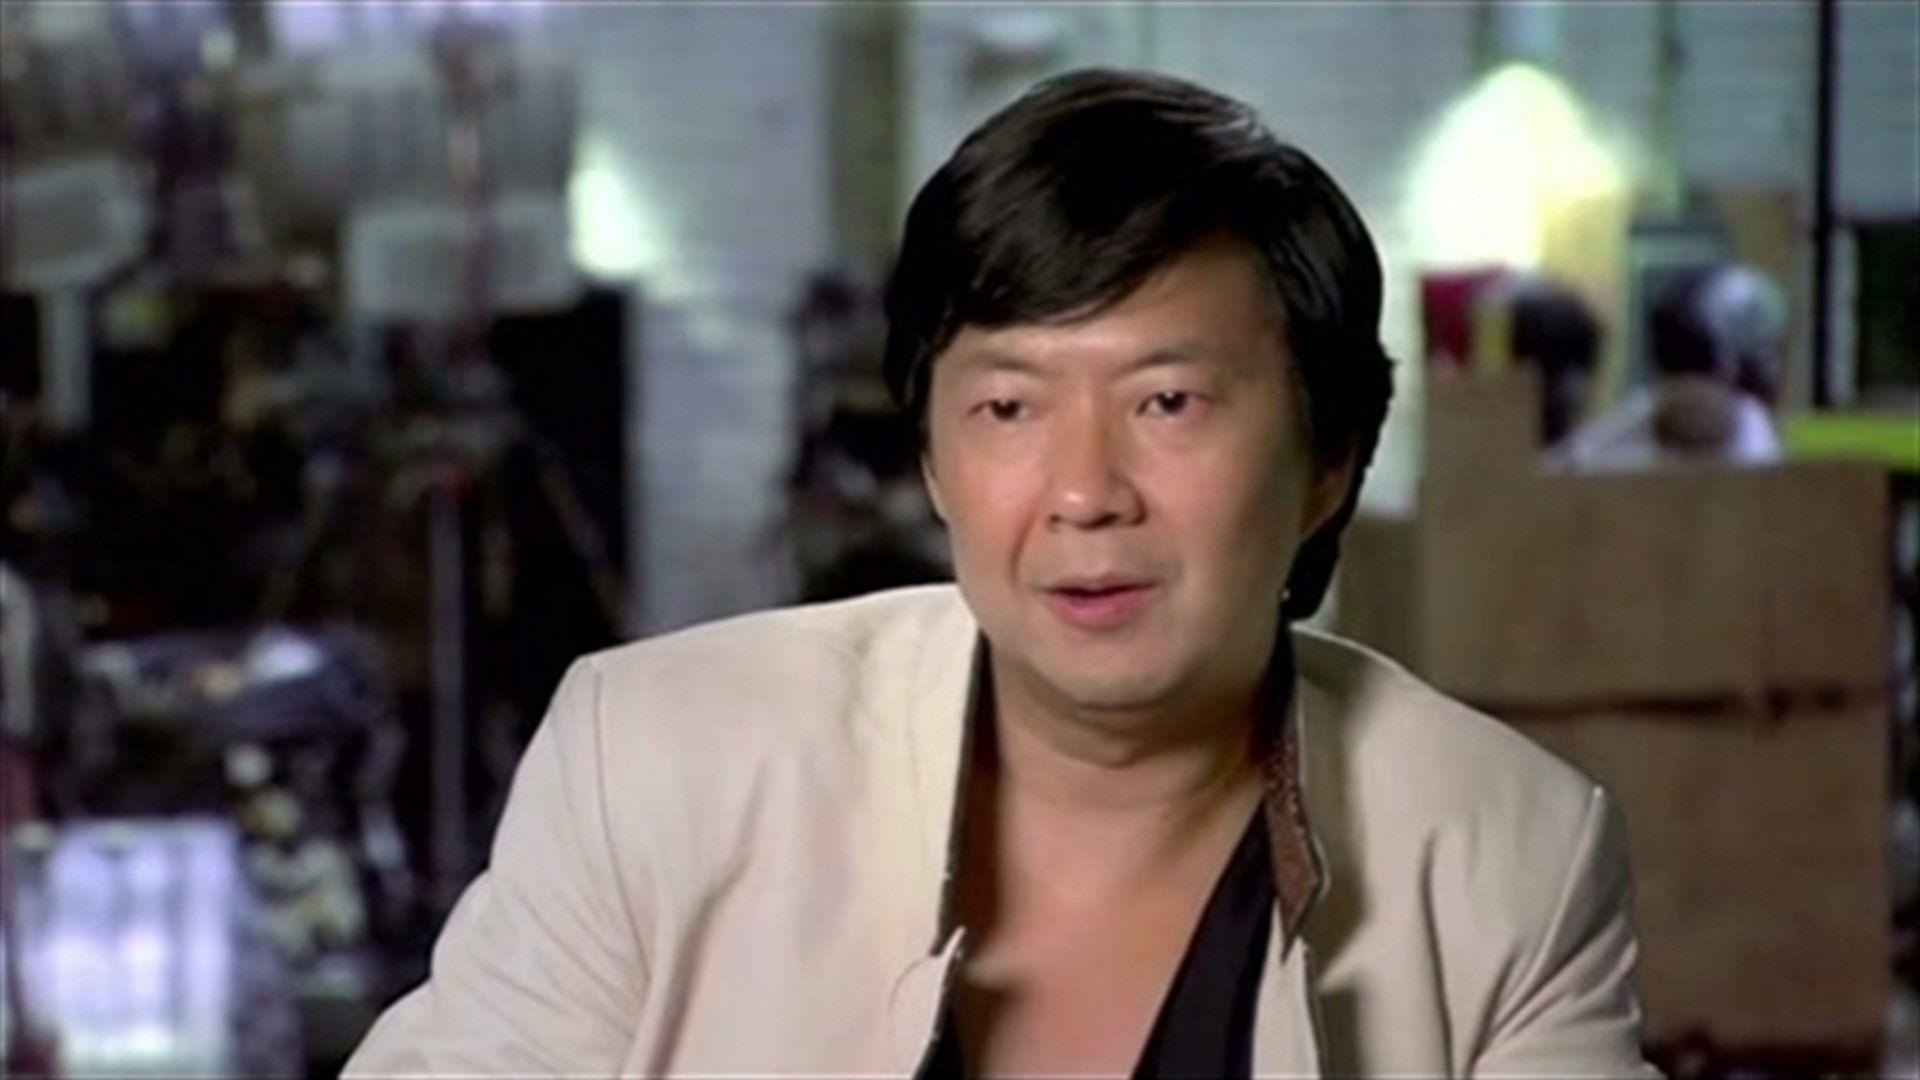 The Hangover Part Iii: Ken Jeong On The Cast And Crew Of